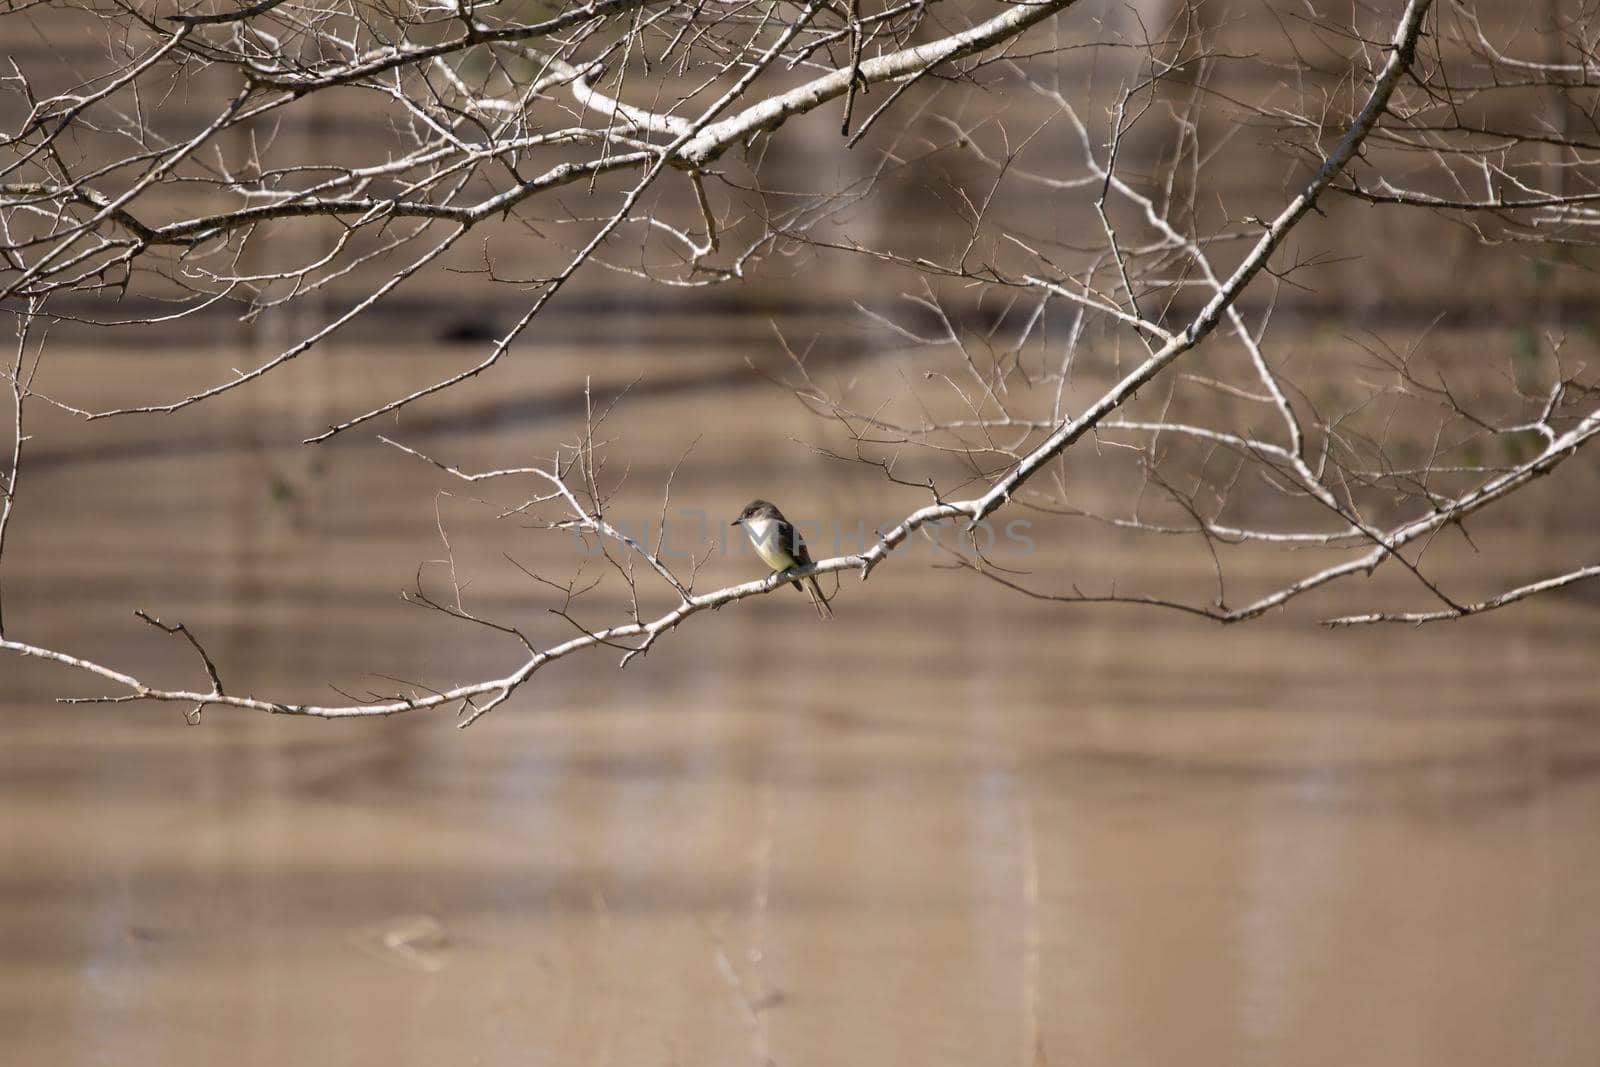 Eastern phoebe (Sayornis phoebe) on a bare branch hanging over muddy water